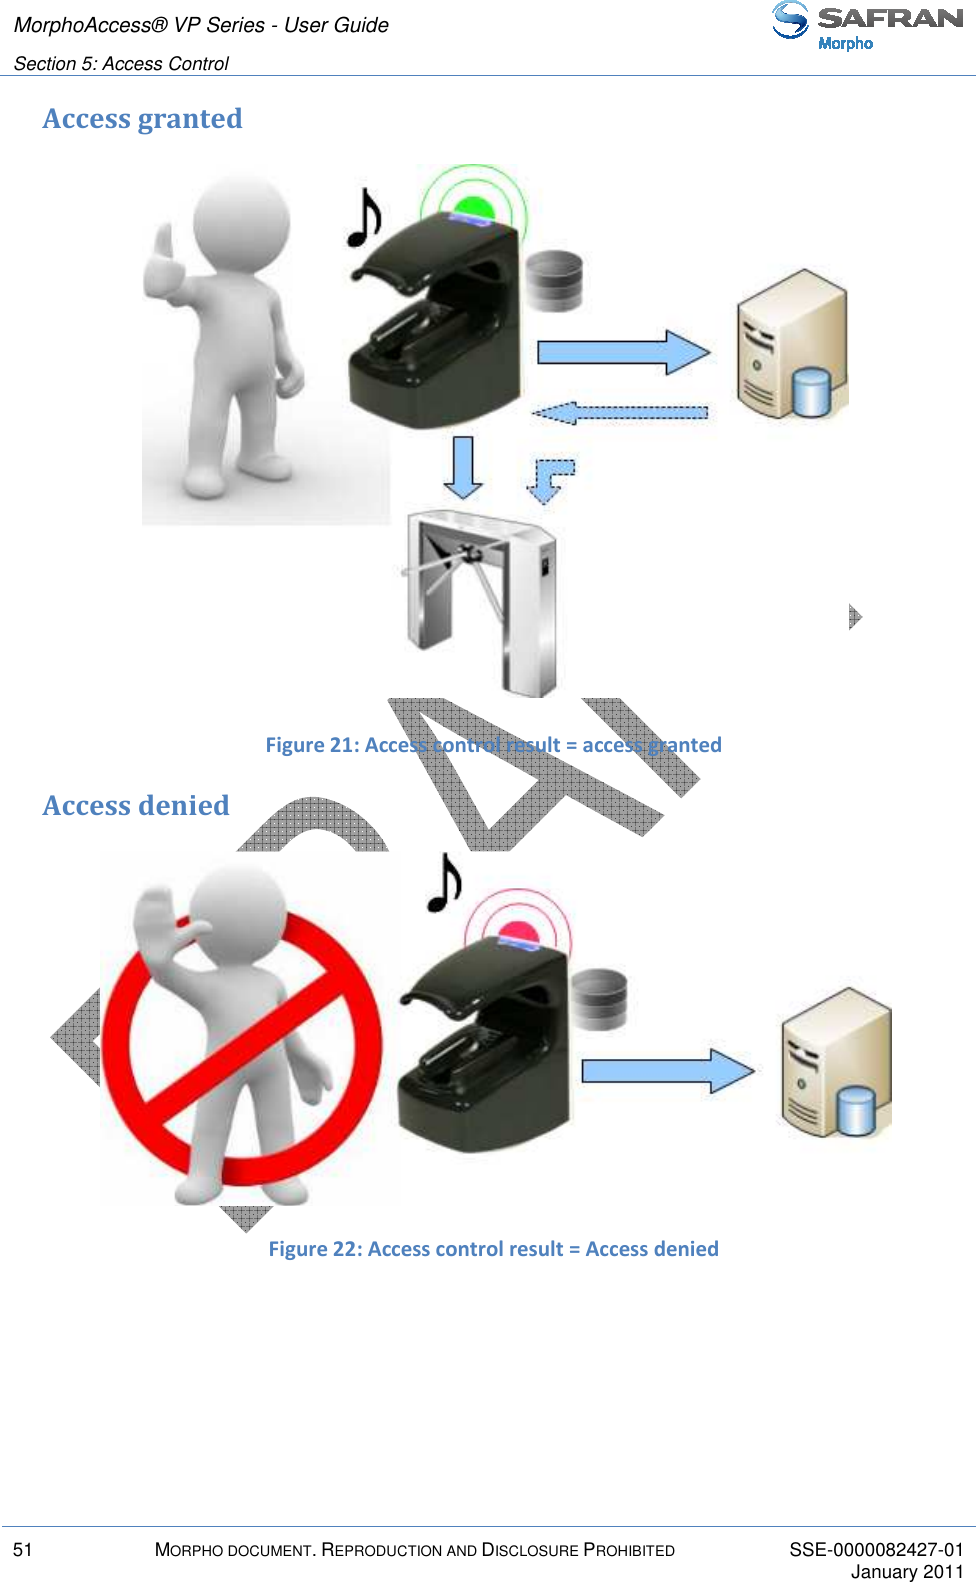 MorphoAccess® VP Series - User Guide   Section 5: Access Control         51  MORPHO DOCUMENT. REPRODUCTION AND DISCLOSURE PROHIBITED  SSE-0000082427-01     January 2011  Access granted  Figure 21: Access control result = access granted Access denied  Figure 22: Access control result = Access denied    